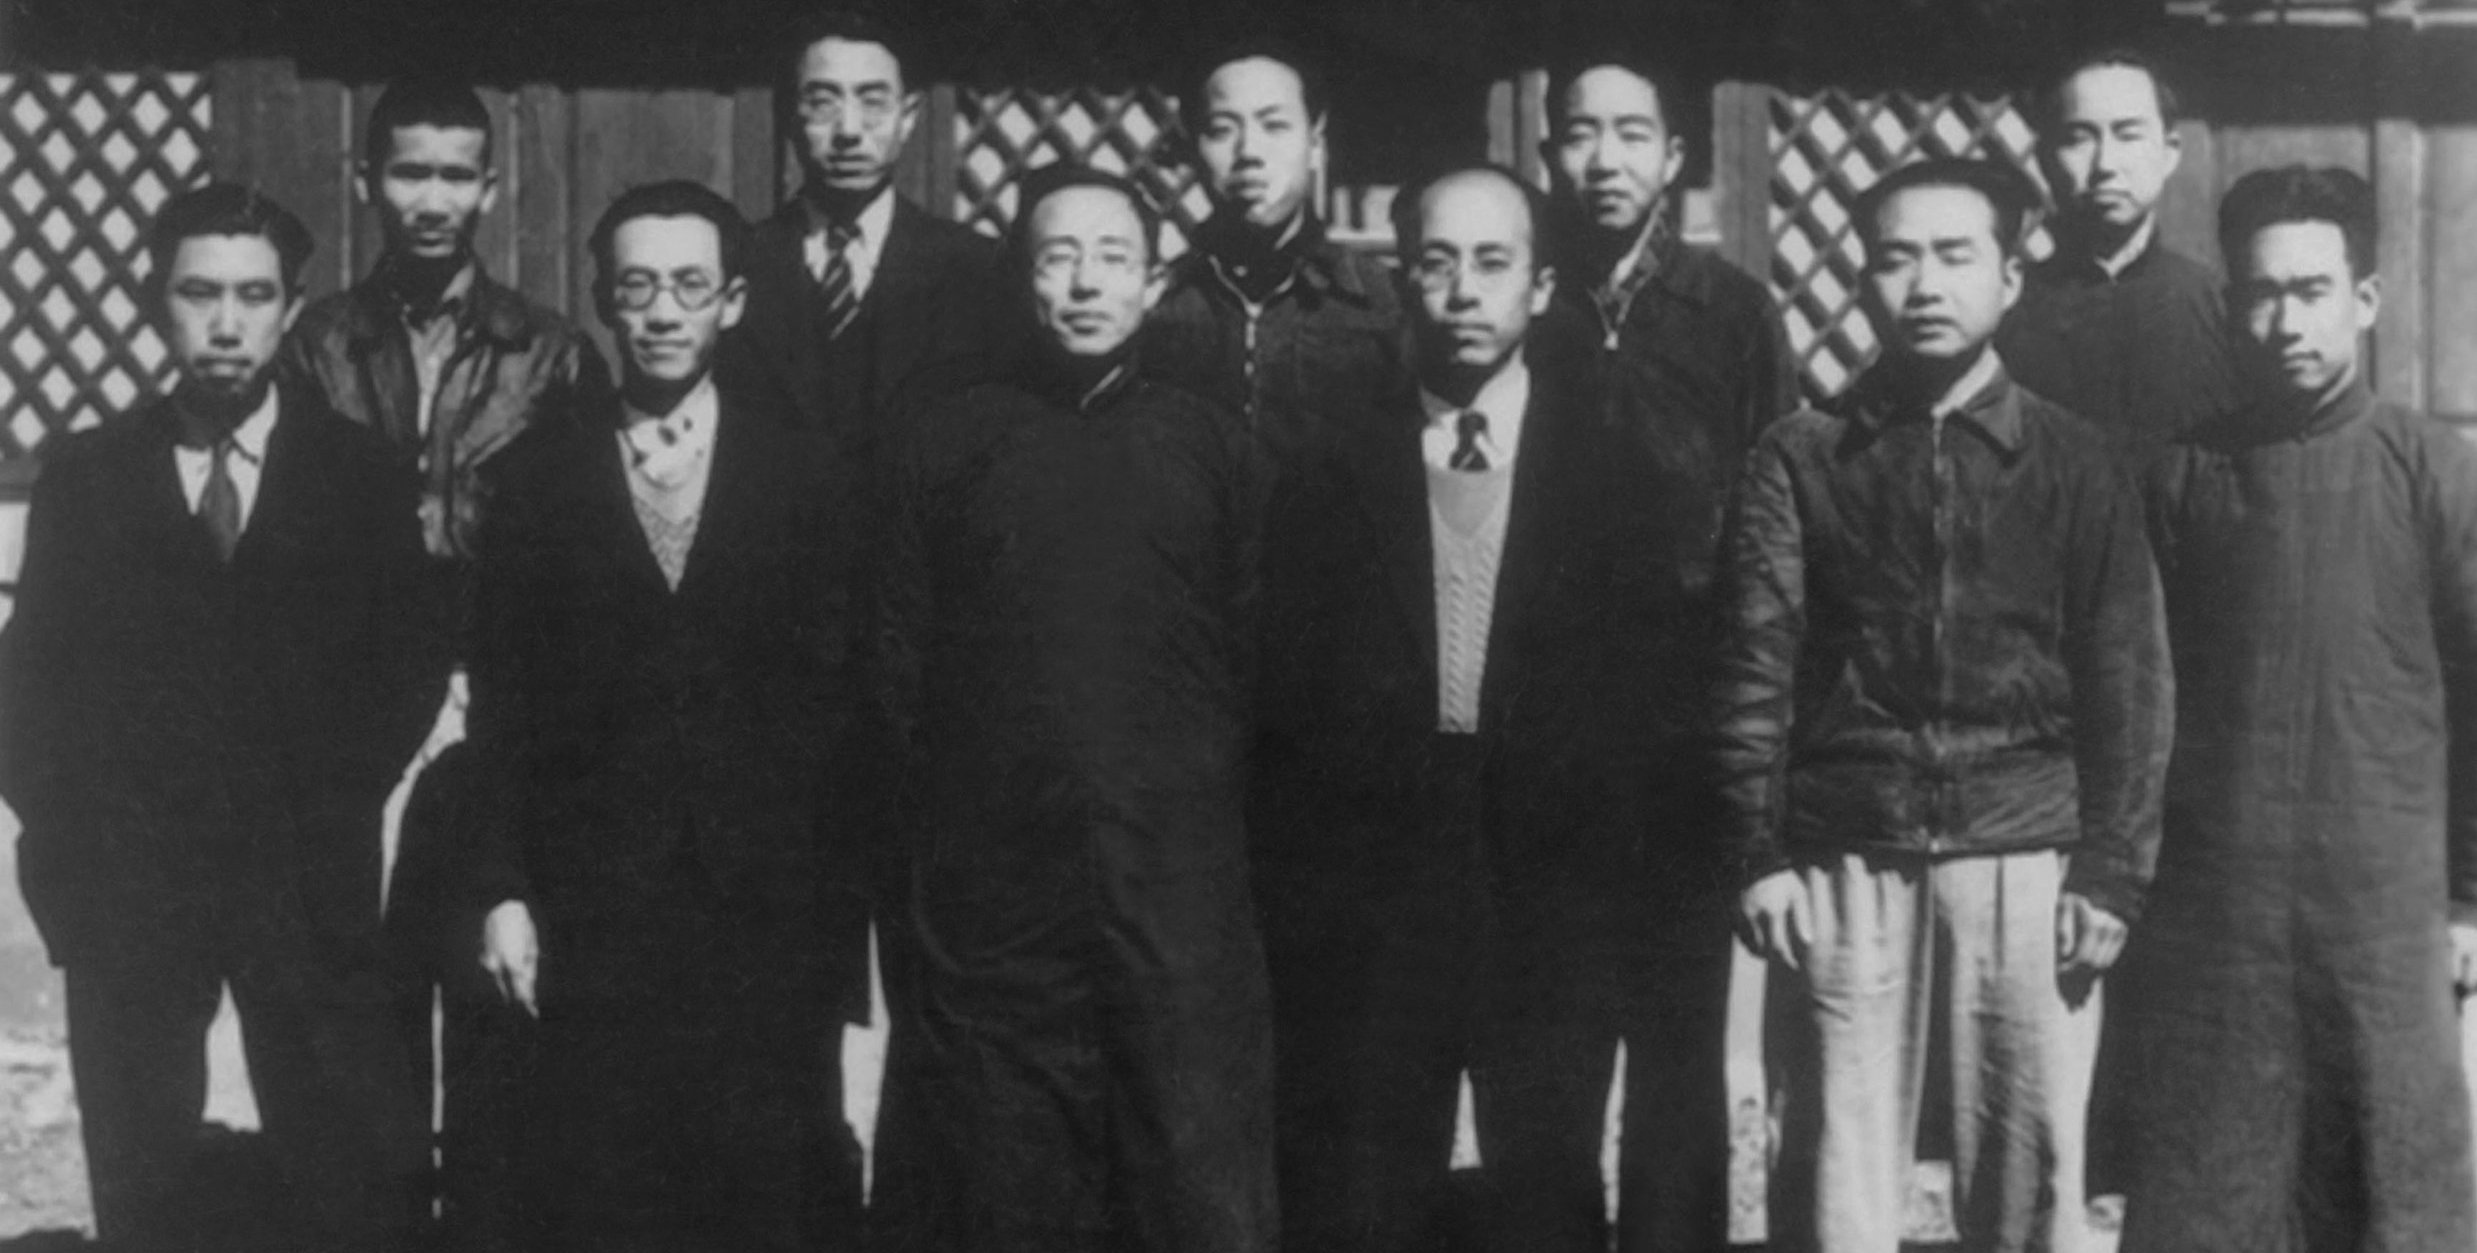 Tsinghua wireless electrical research institute, Kunming. ca. 1938. CK Jen is front row, third from left.